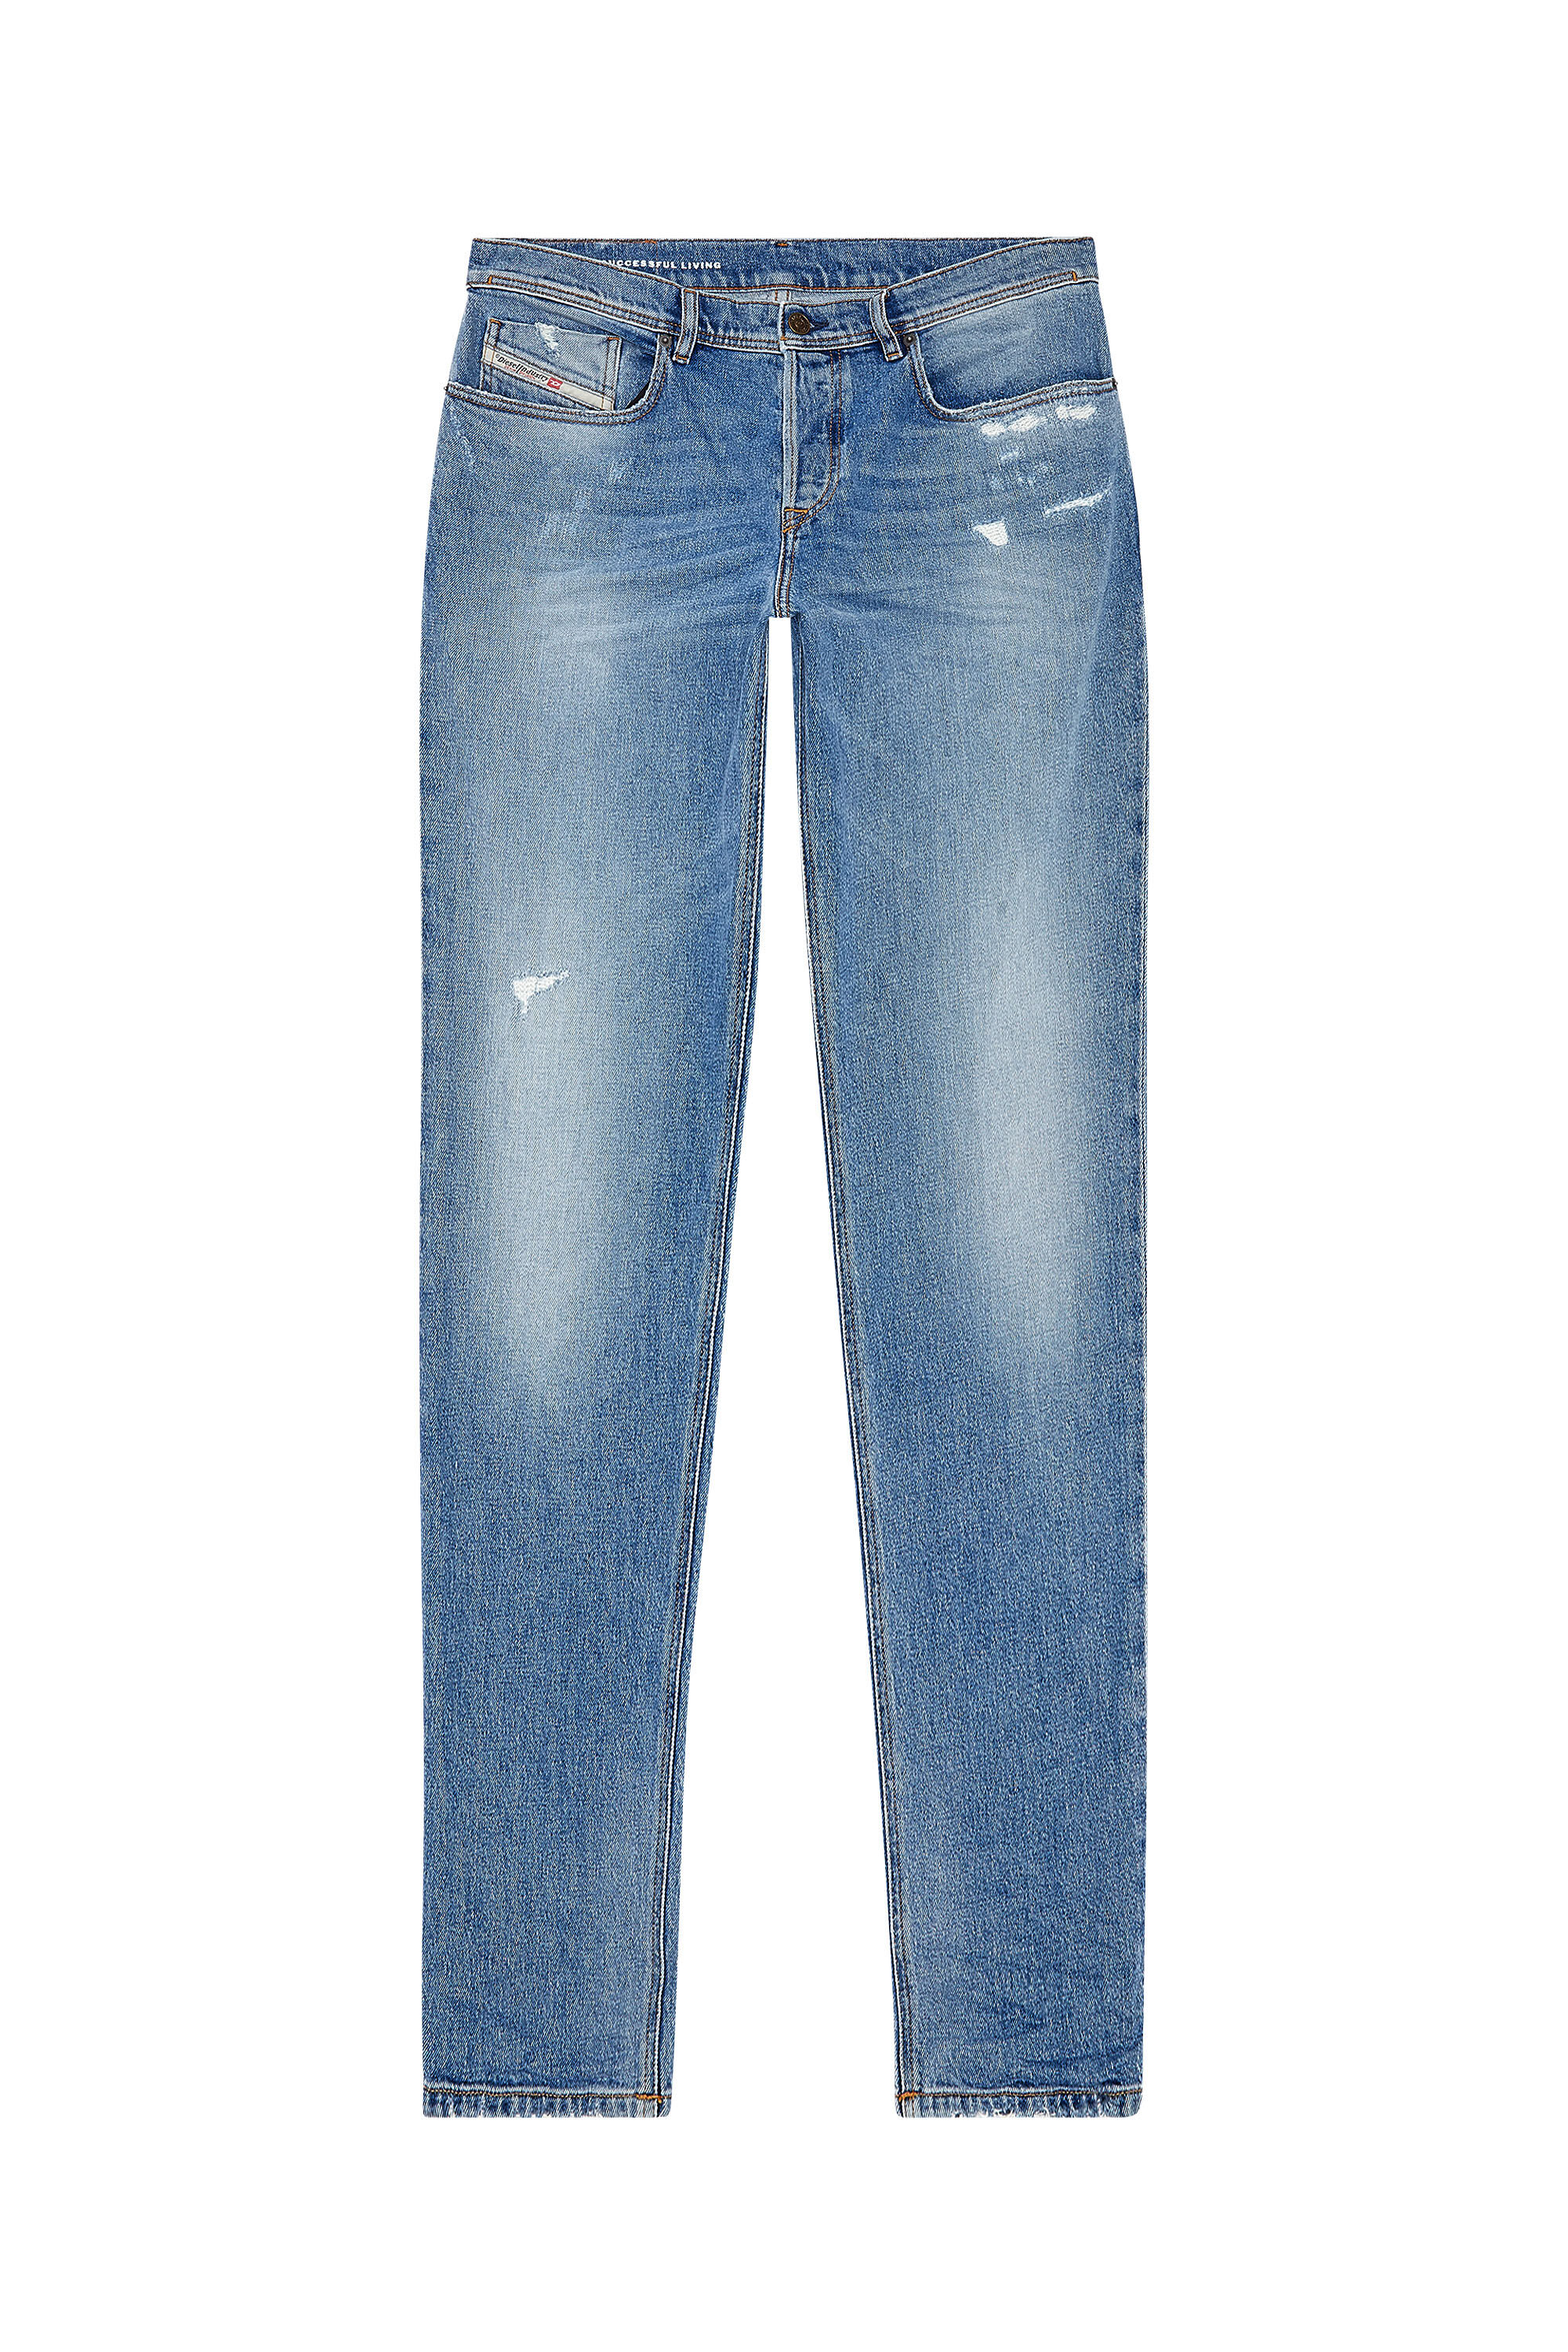 Women's Light Wash Tapered Jeans